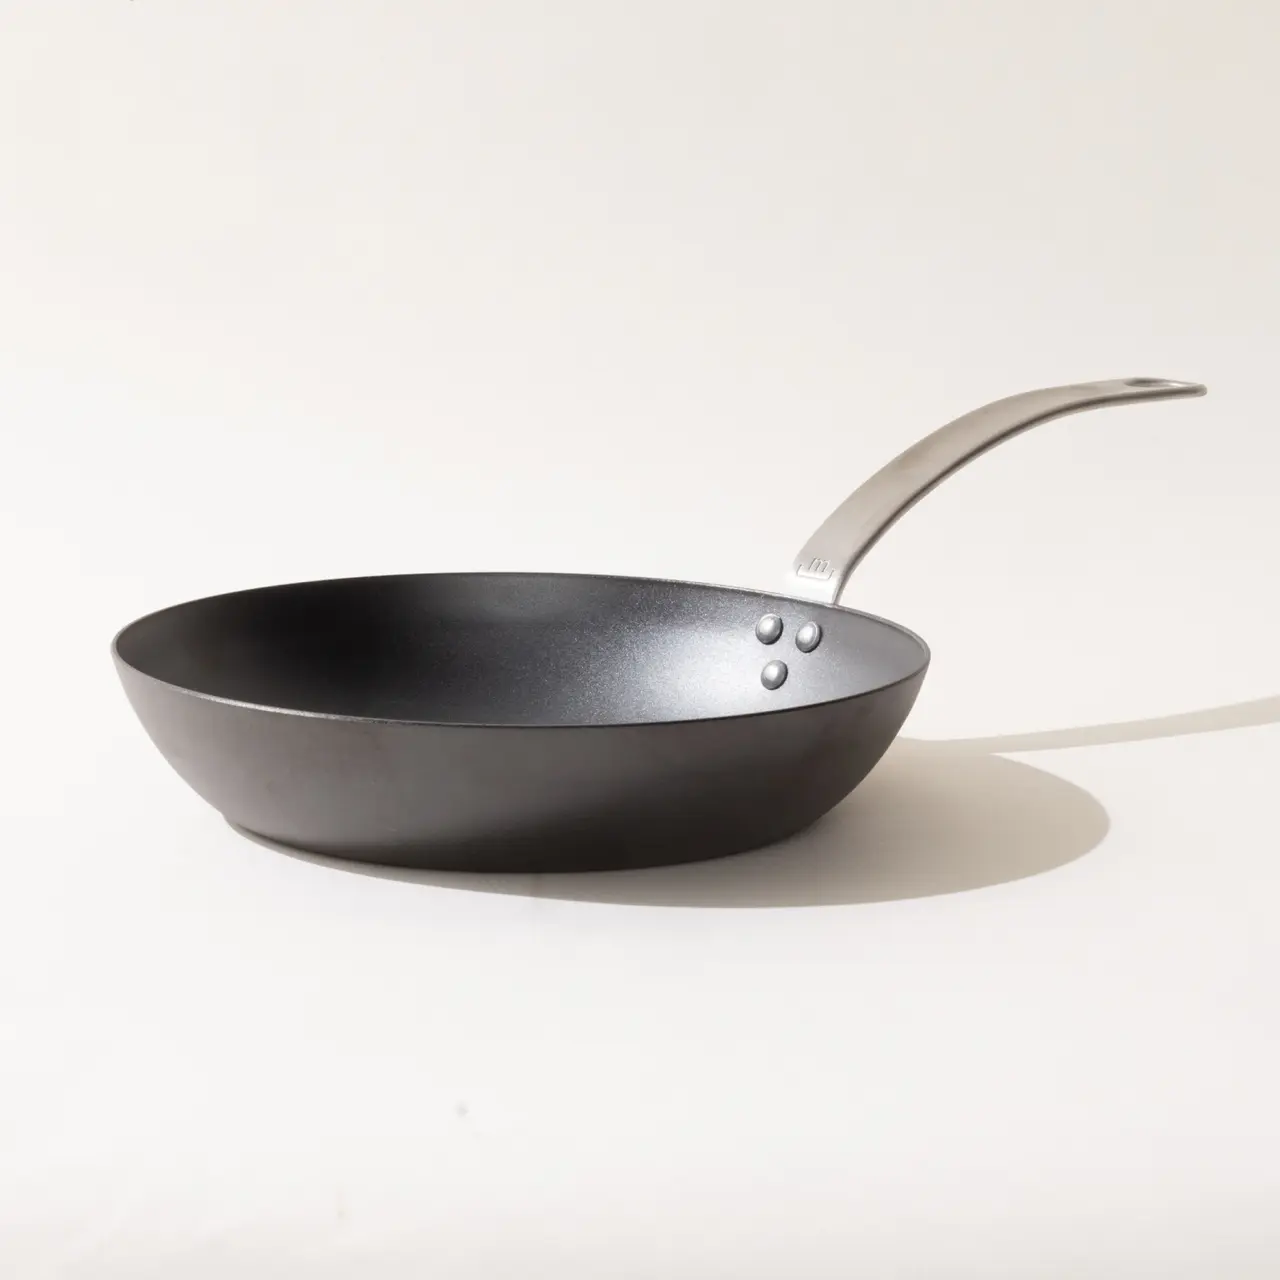 A black frying pan with a silver handle positioned on a plain background showcasing its profile.